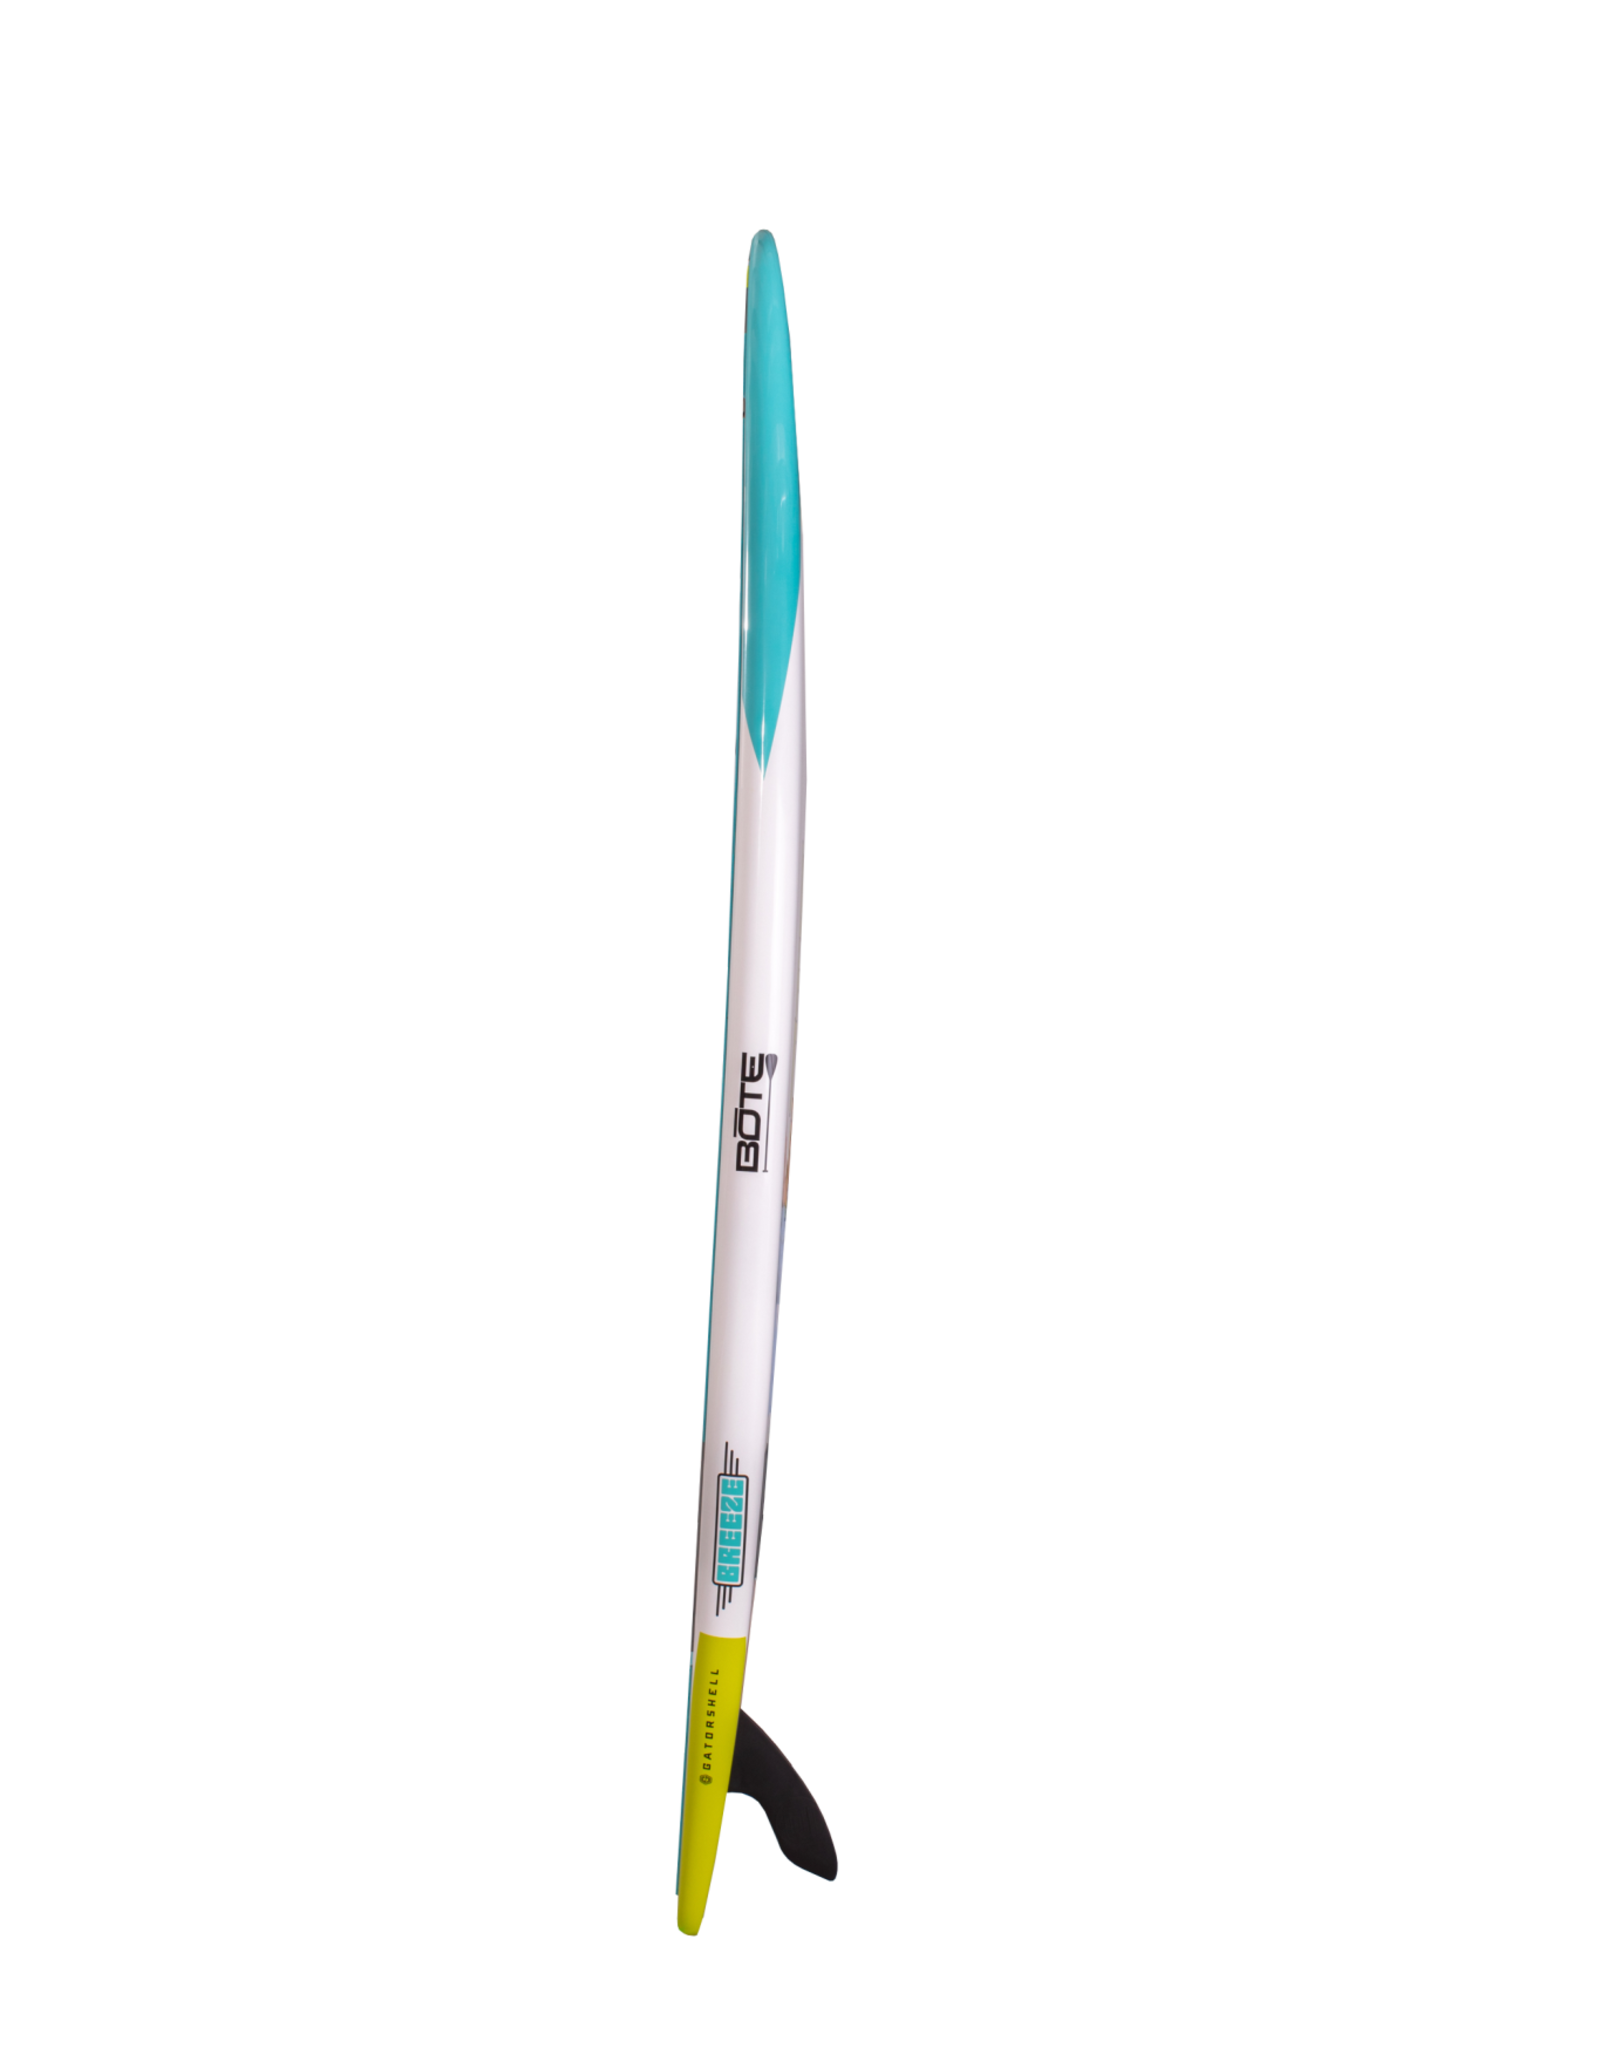 Bote BOTE Breeze 10′6″ Full Trax Citron with MAGNEPOD™ Paddle Board